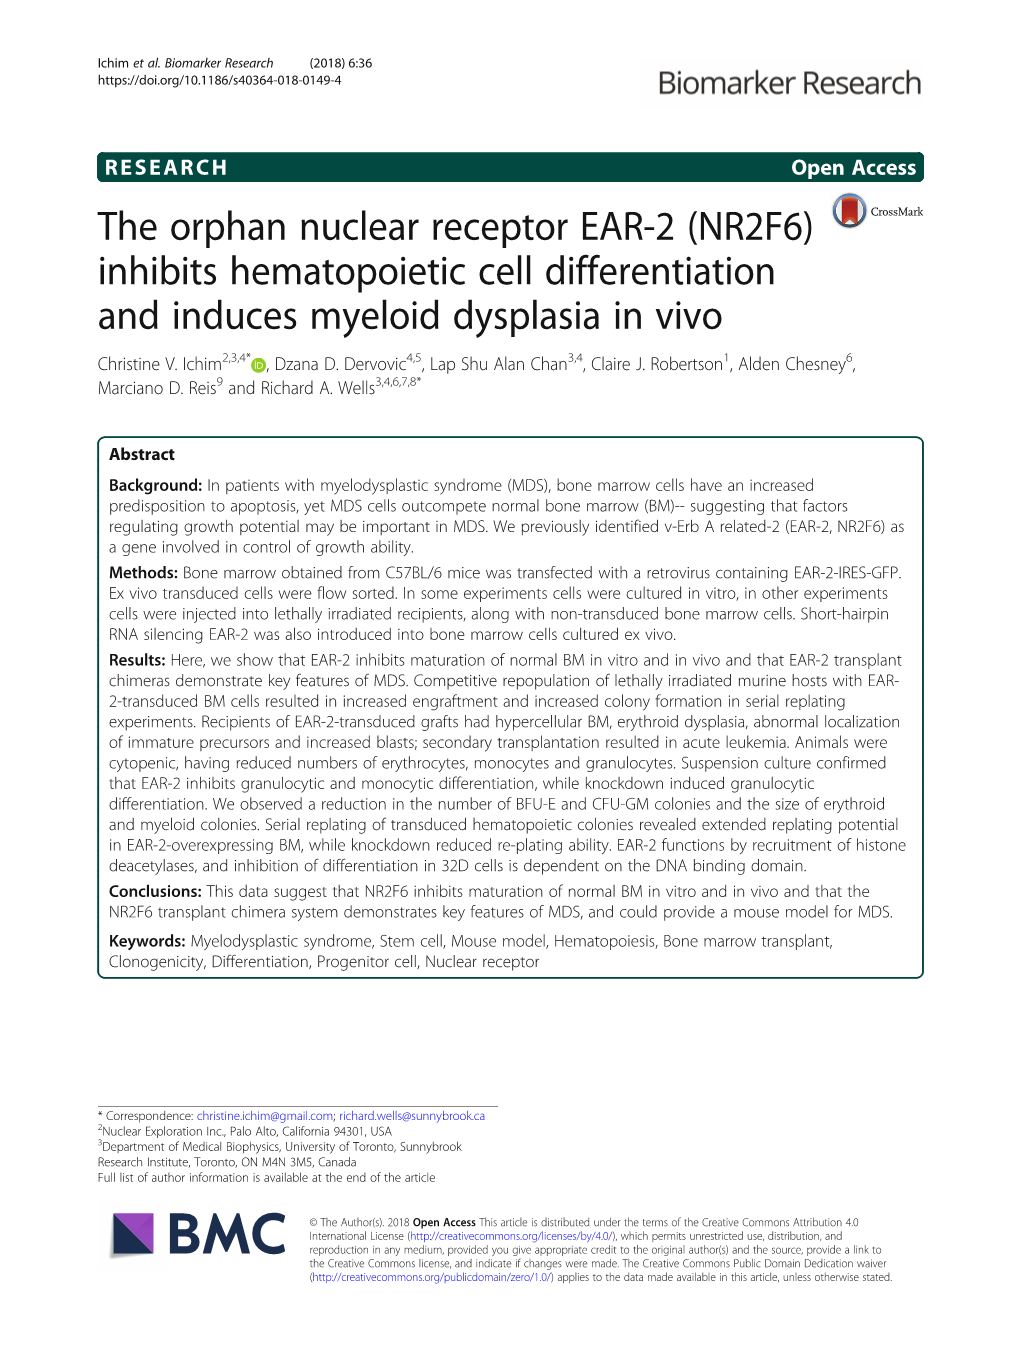 Inhibits Hematopoietic Cell Differentiation and Induces Myeloid Dysplasia in Vivo Christine V